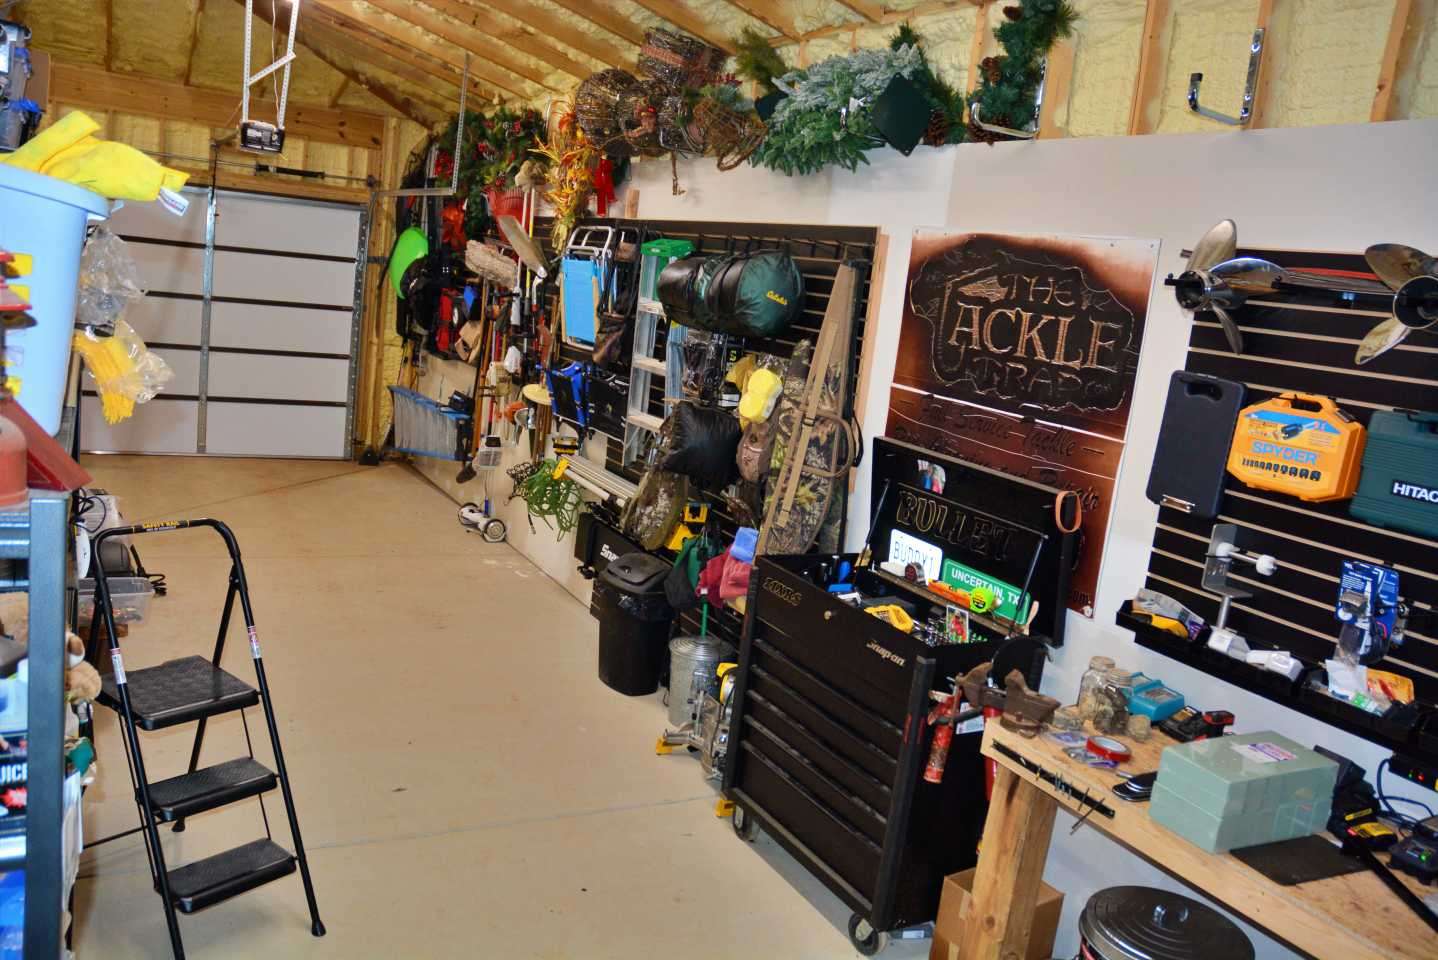 This is a separate room filled with more tackle and items youâd find inside a home garage. 